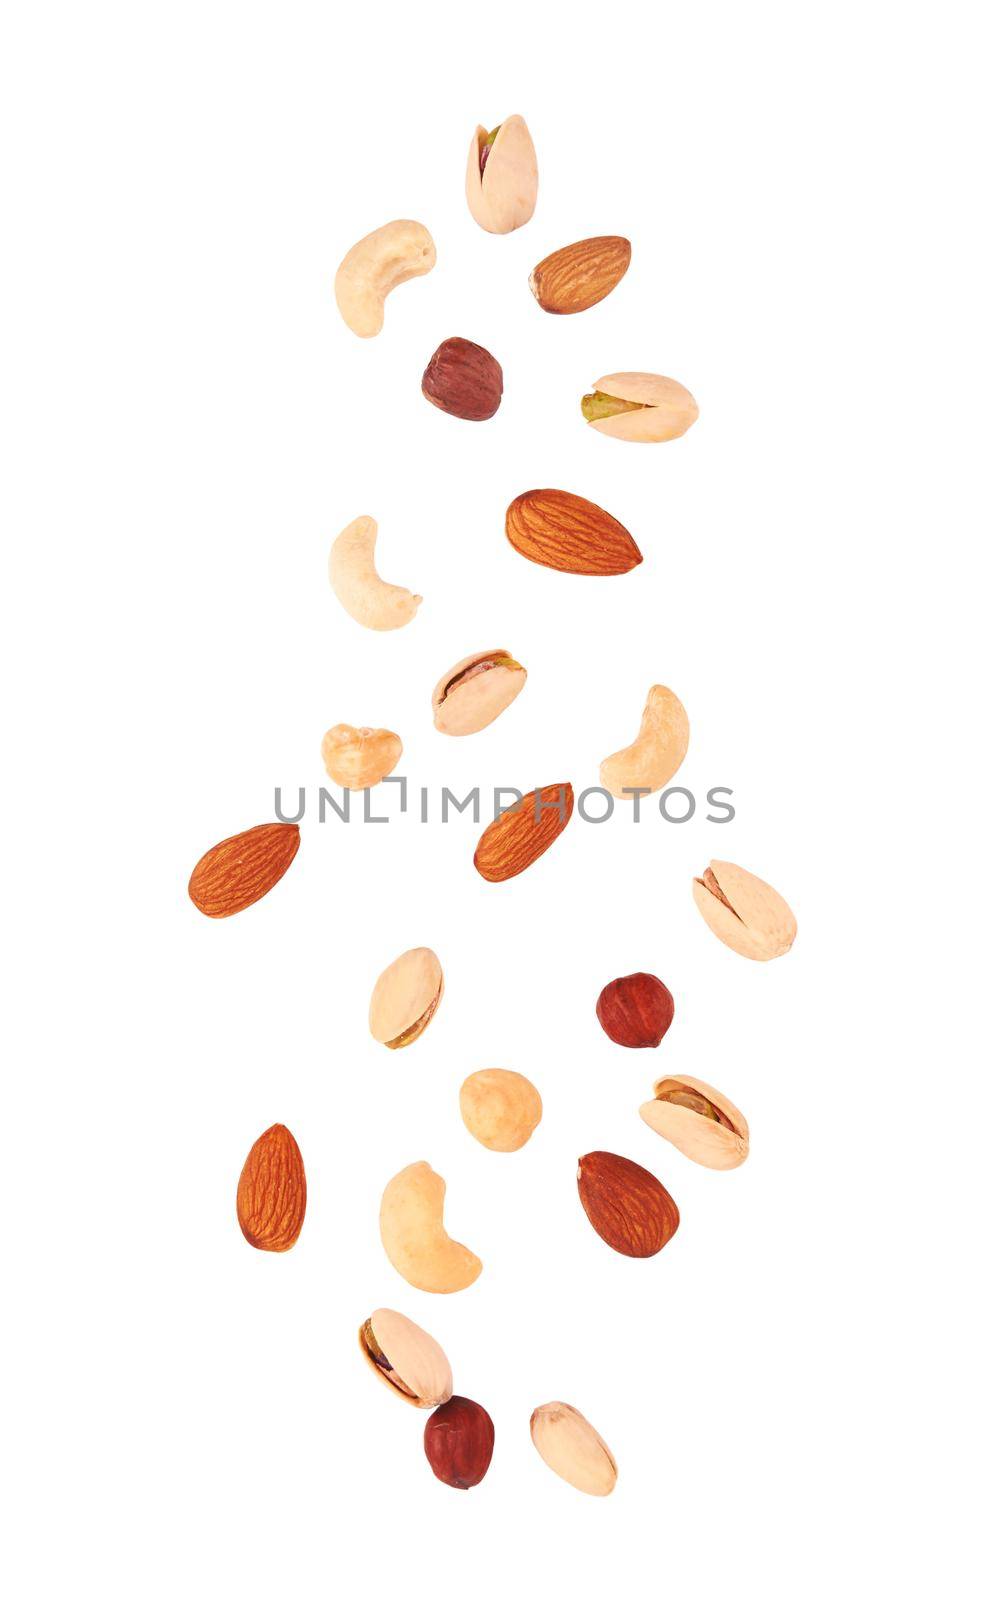 Nuts on white by pioneer111